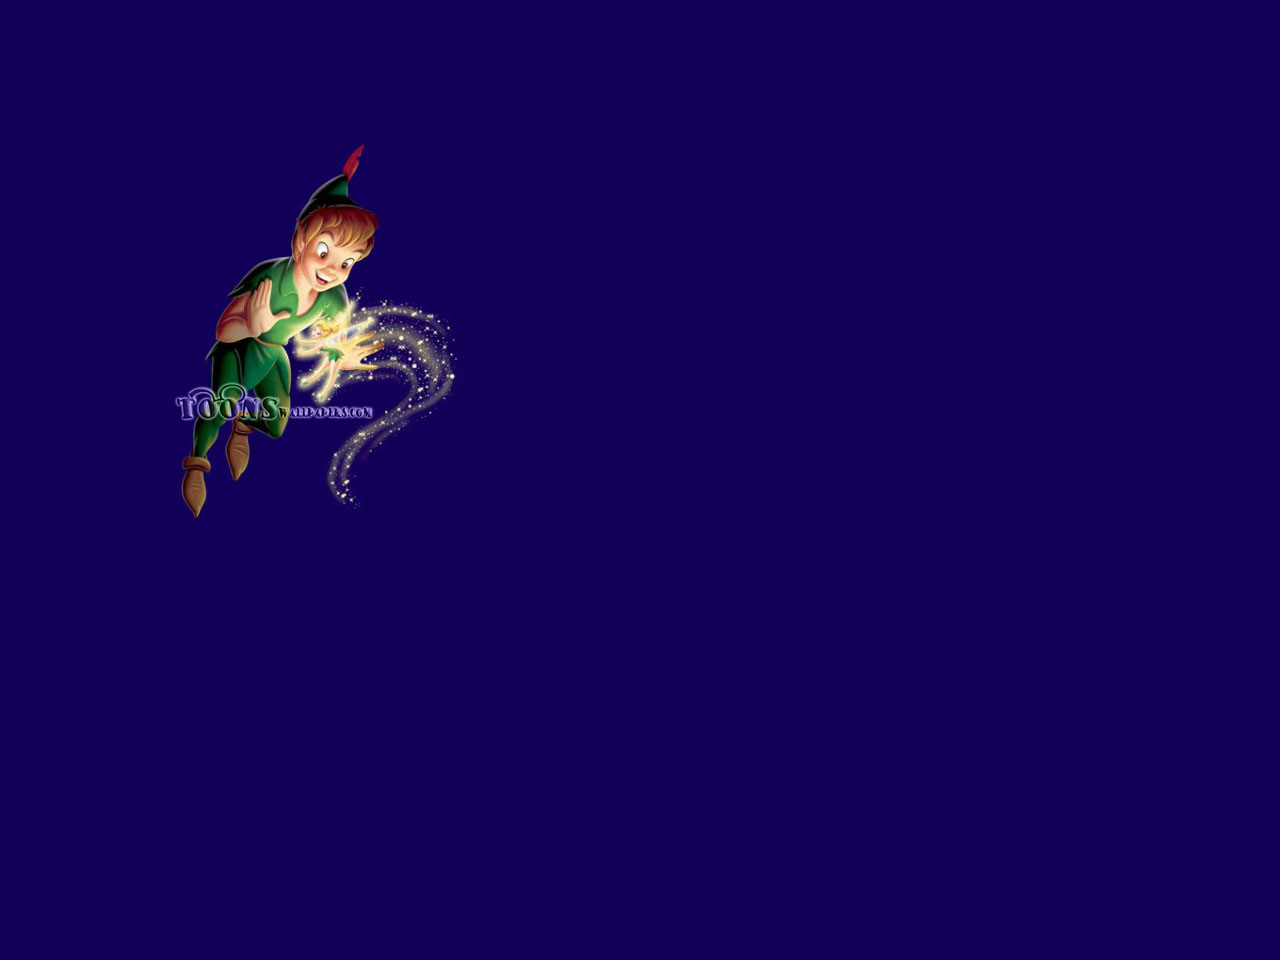 Tinkerbell Wallpaper Below Choose Quotsave Image Asquot And Youaposre